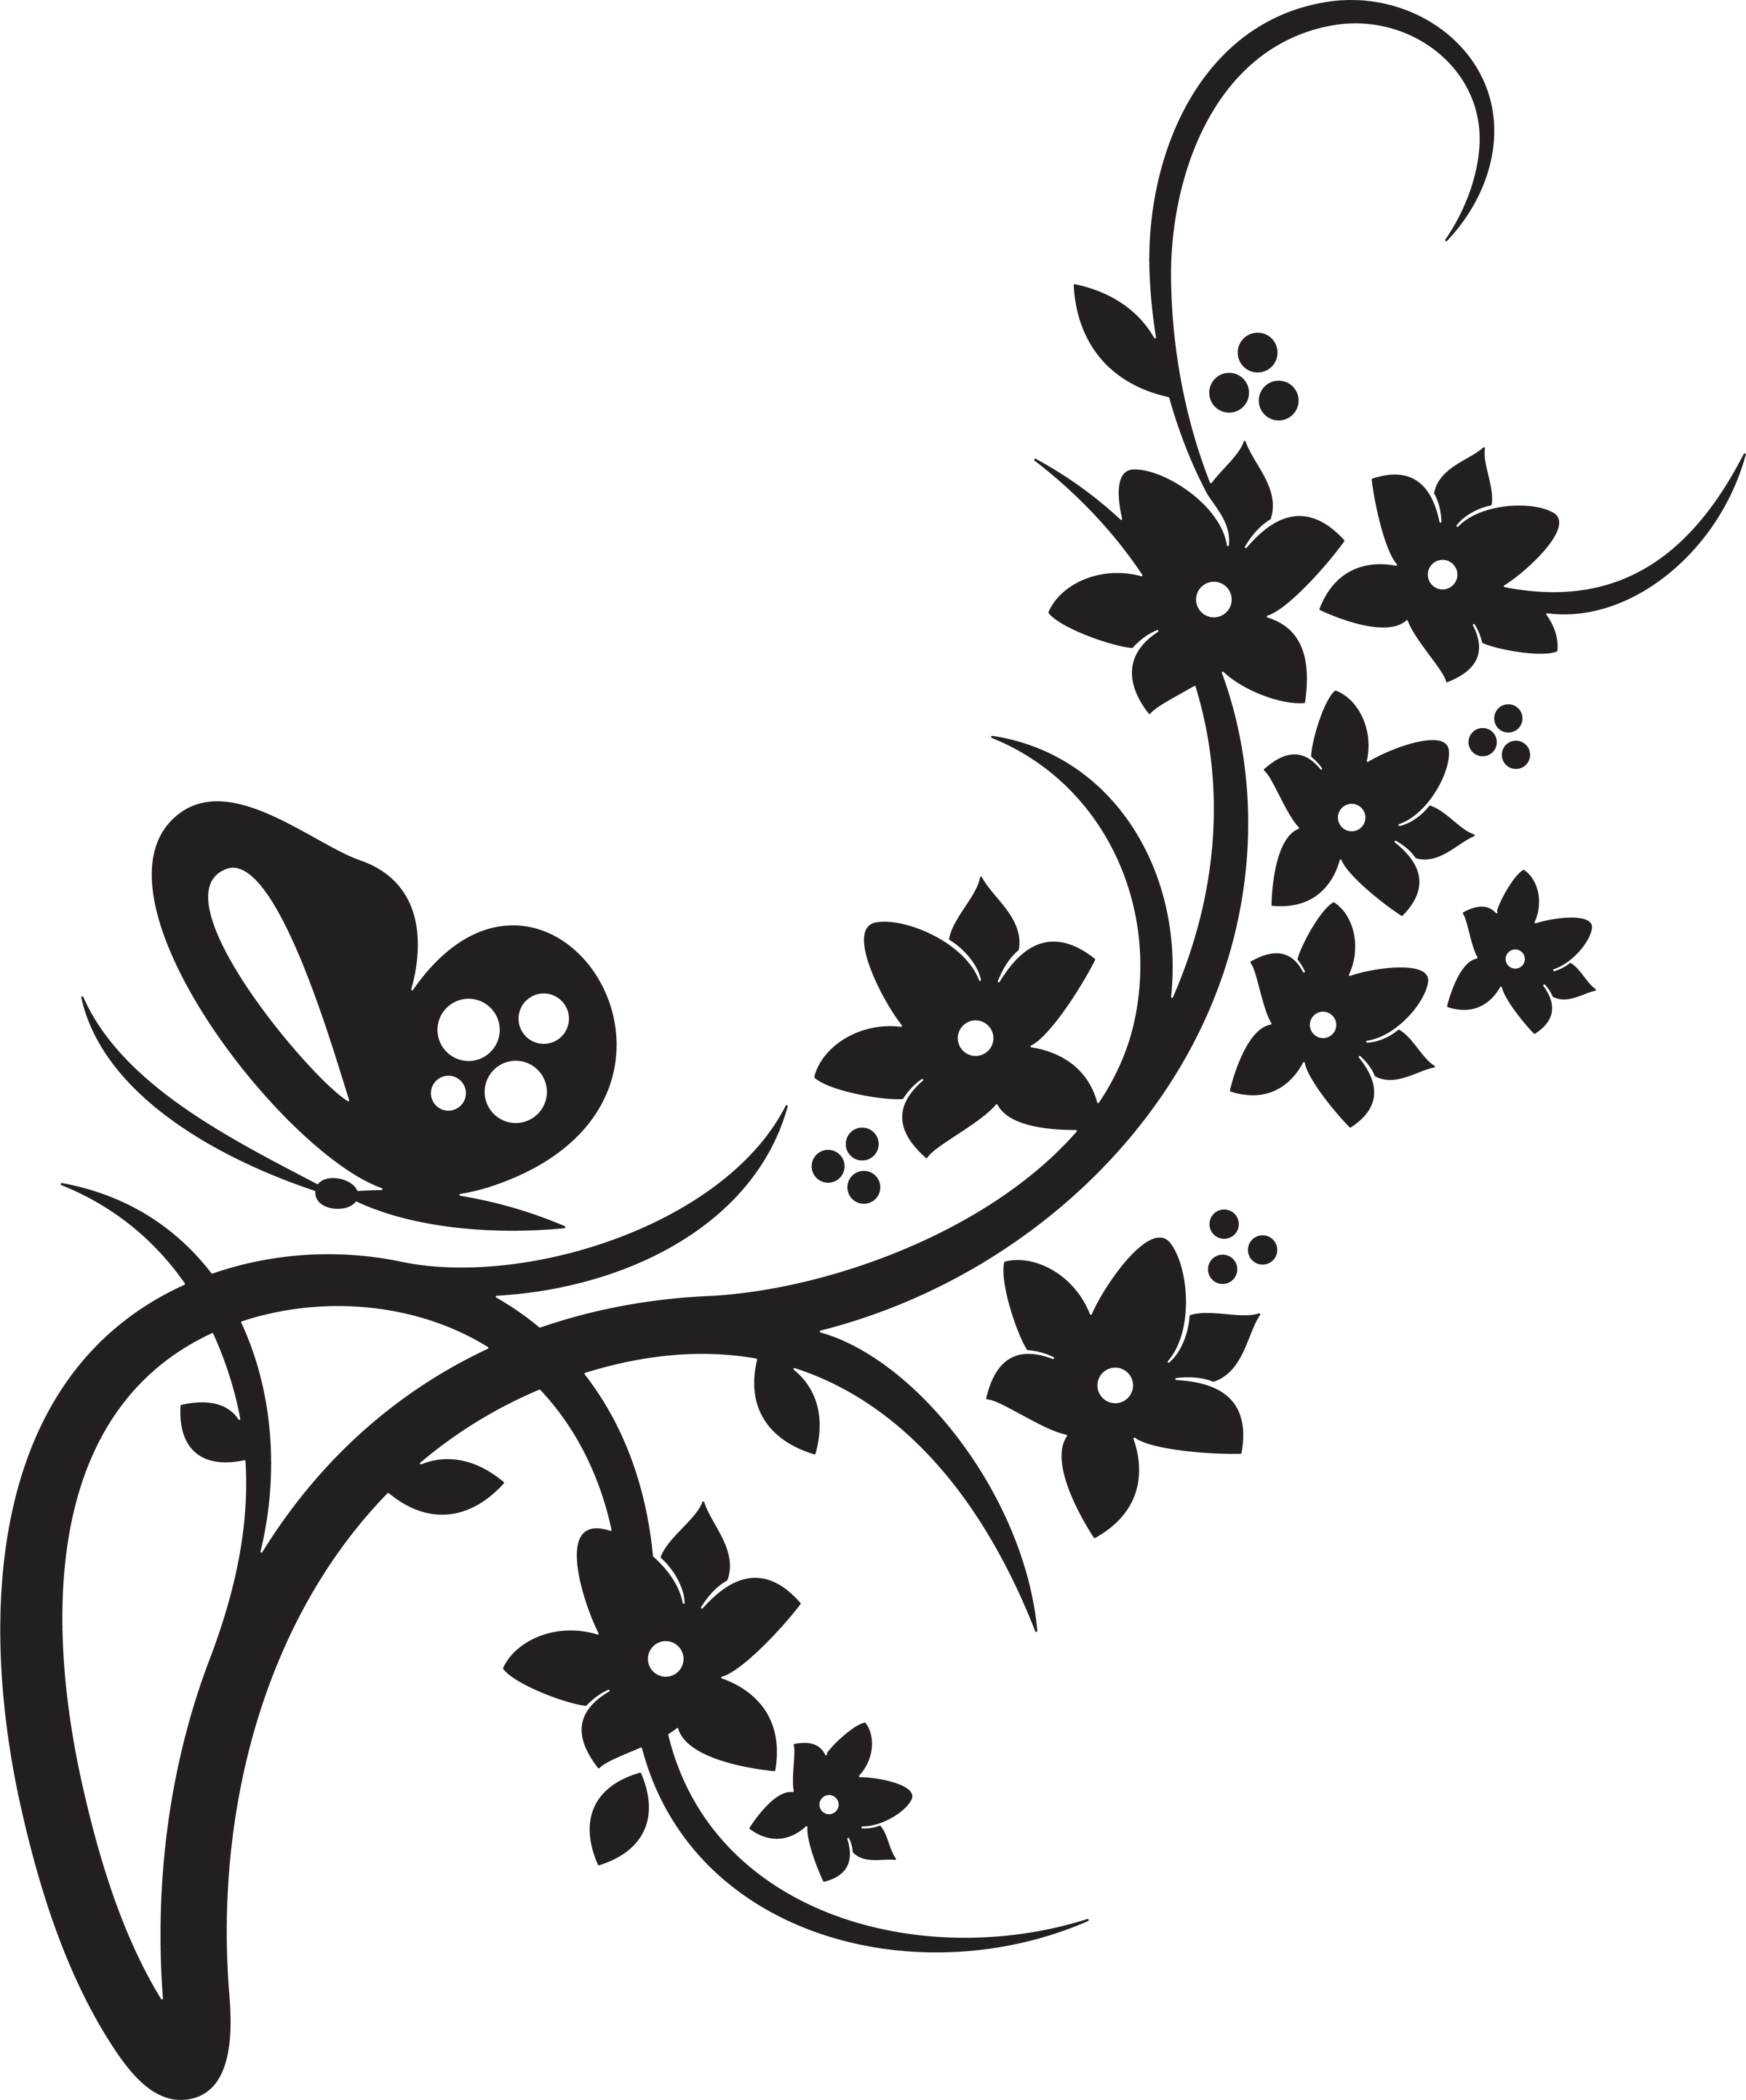 Free floral cliparts.